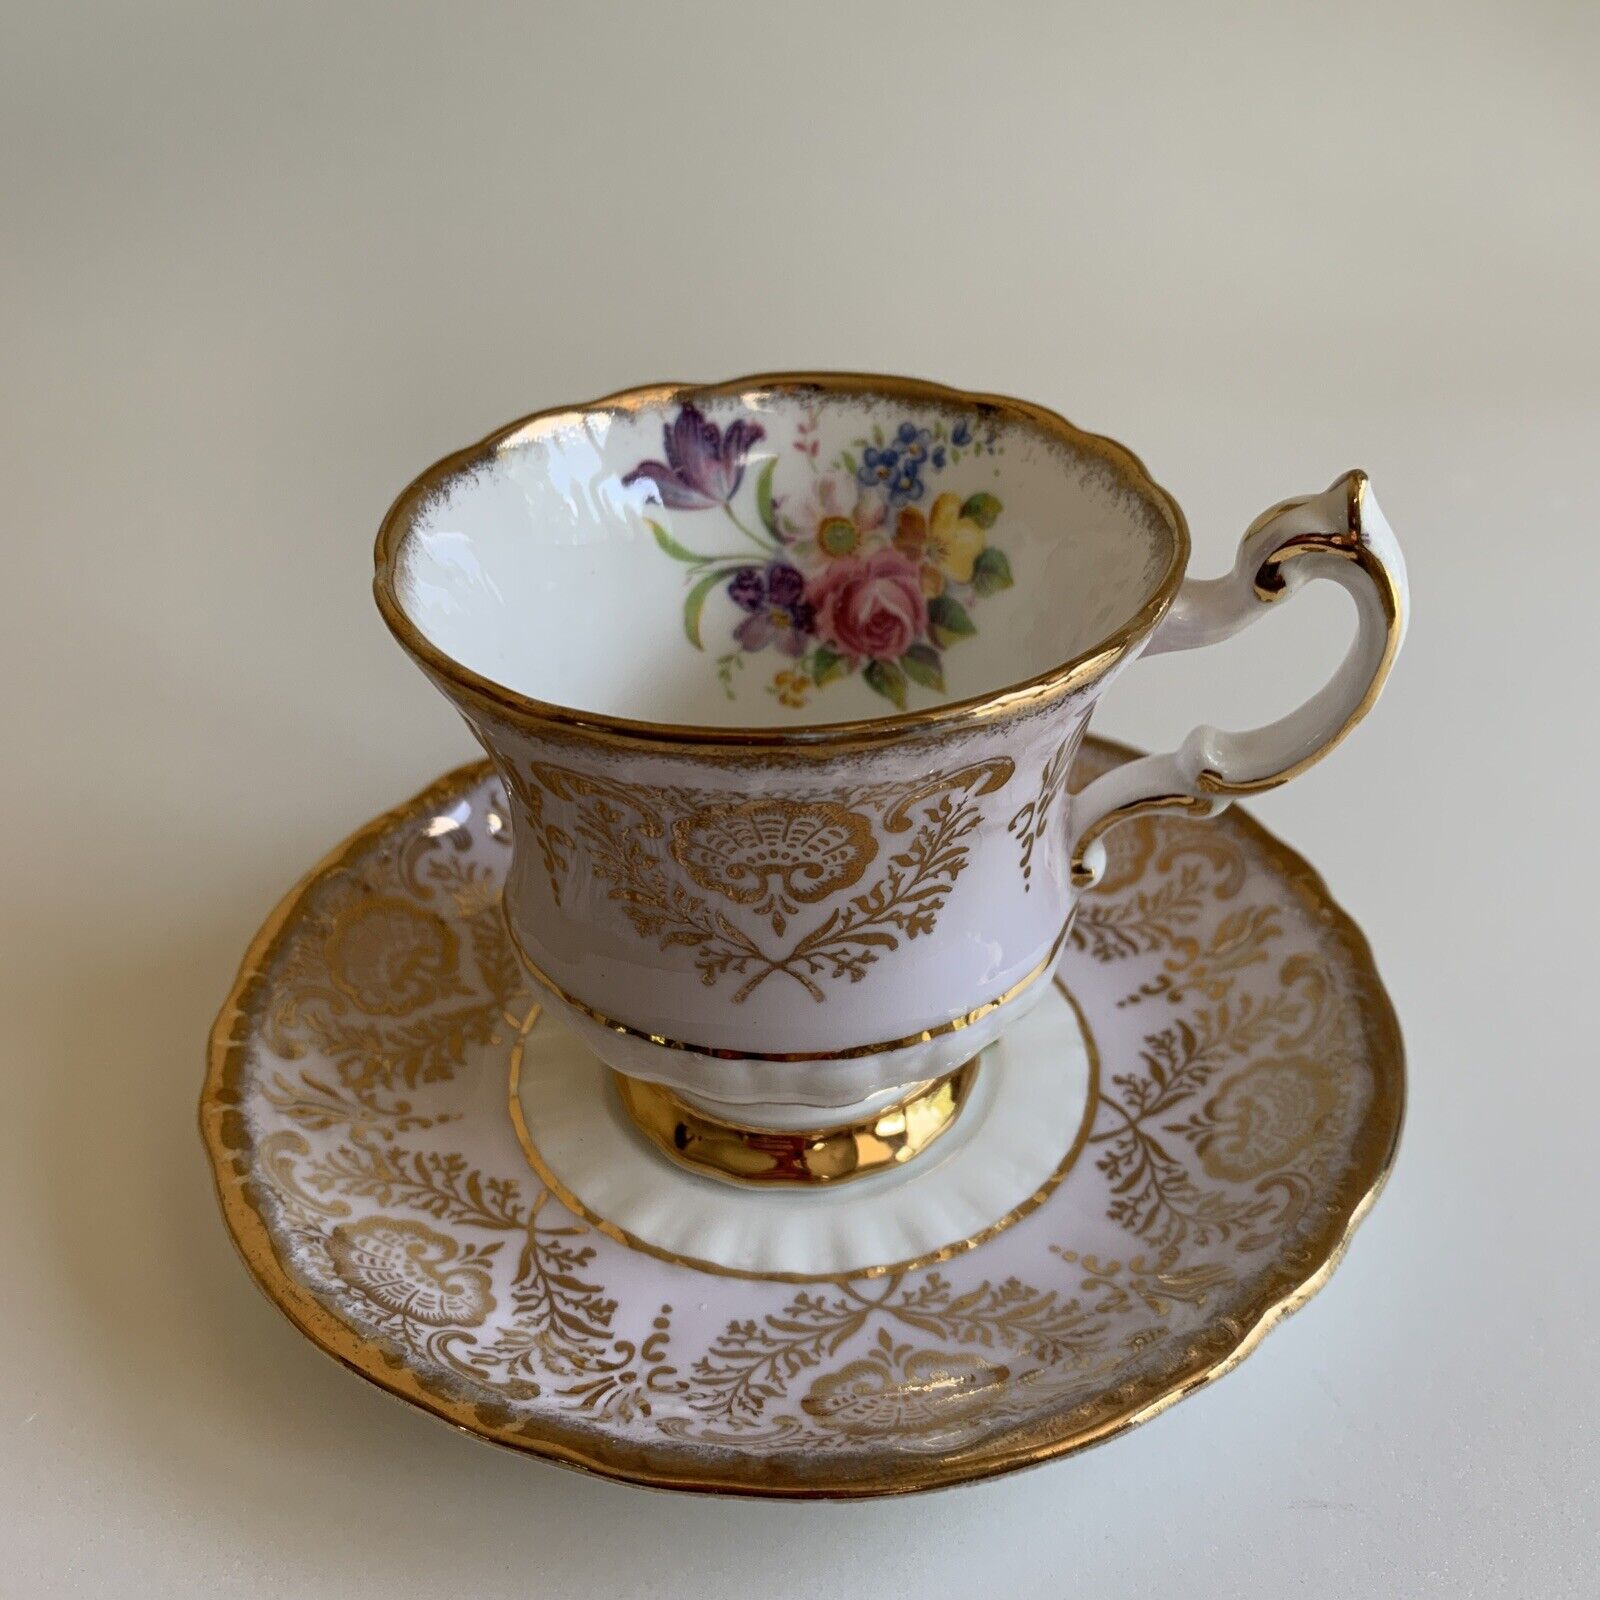 PARAGON By Appointment to Her Majesty the Queen Cup & Saucer; Lavender w/Flowers